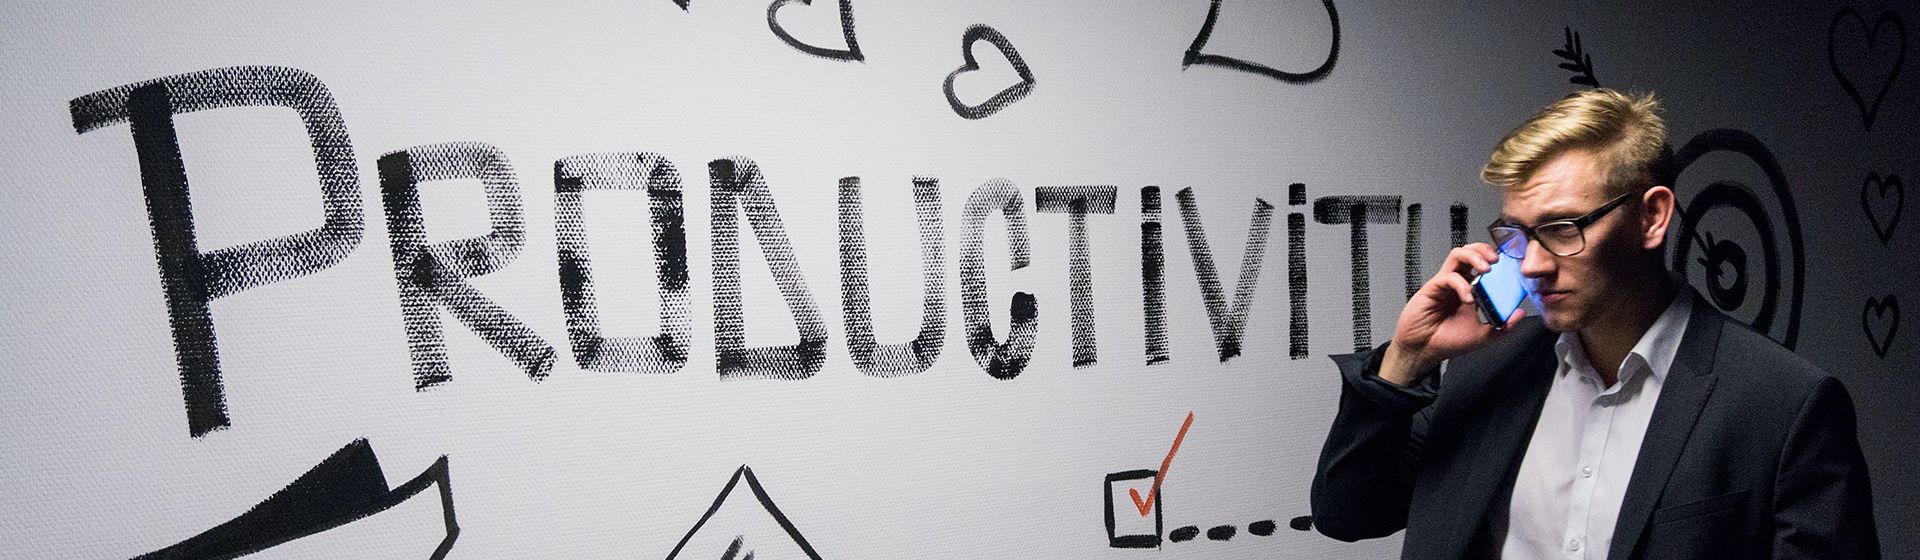 5 ways to supercharge staff productivity